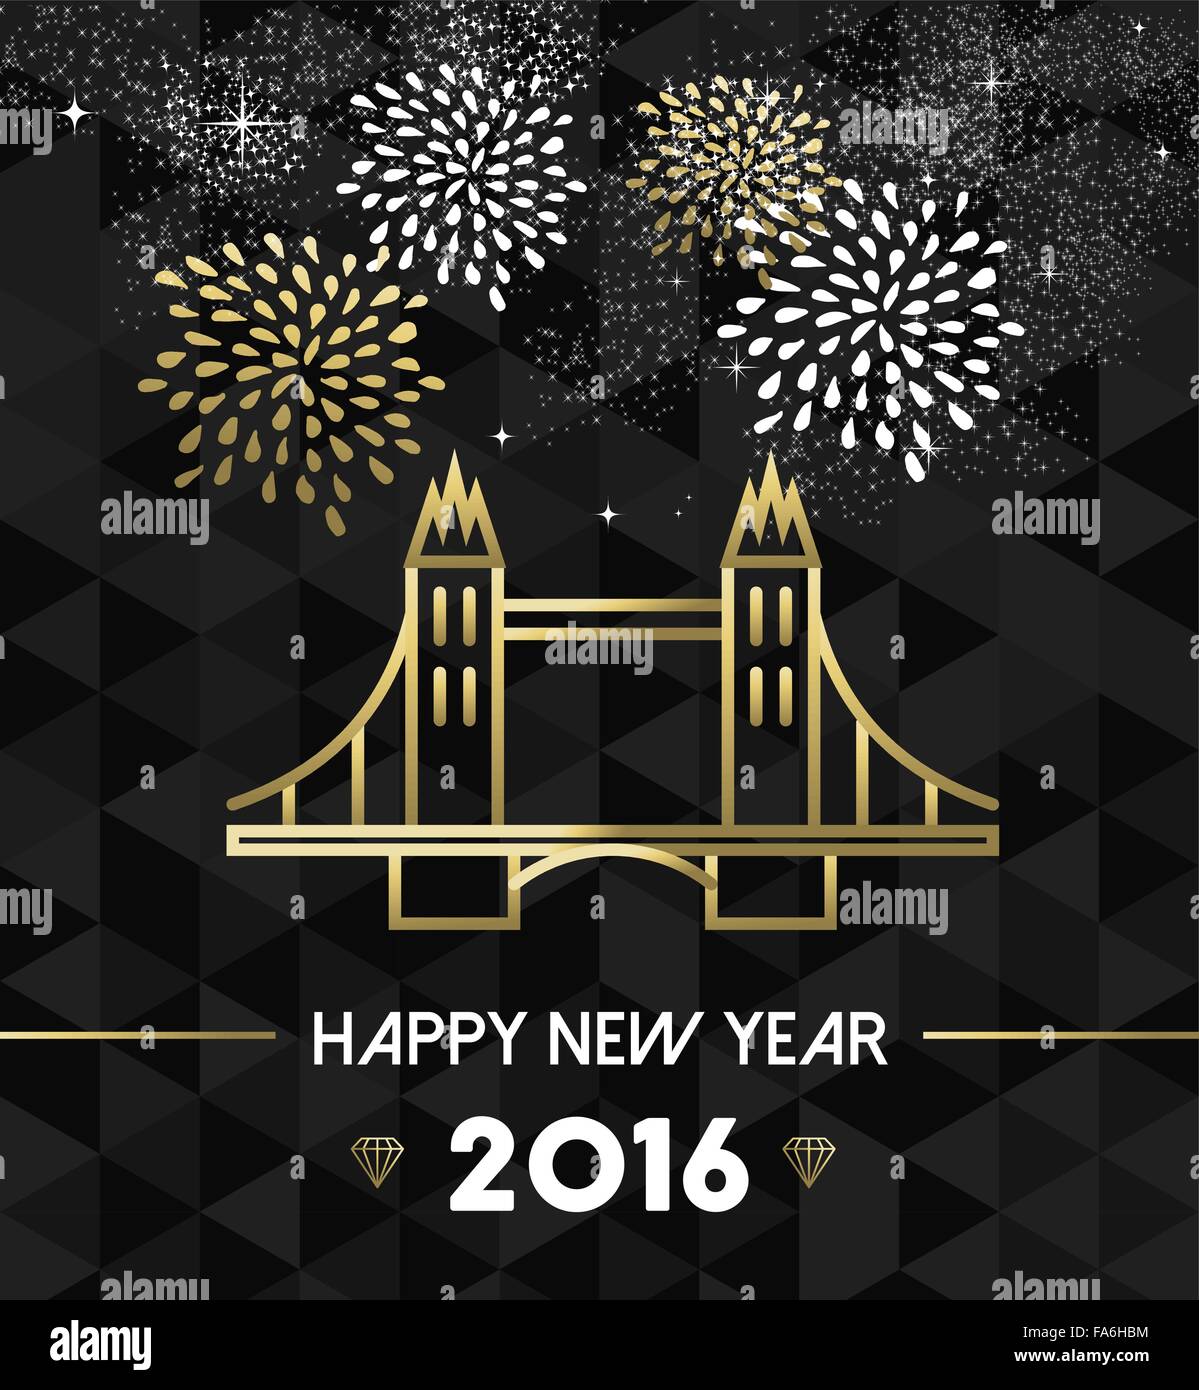 Happy New Year 2016 London greeting card with England landmark tower bridge in gold outline style. EPS10 vector. Stock Vector